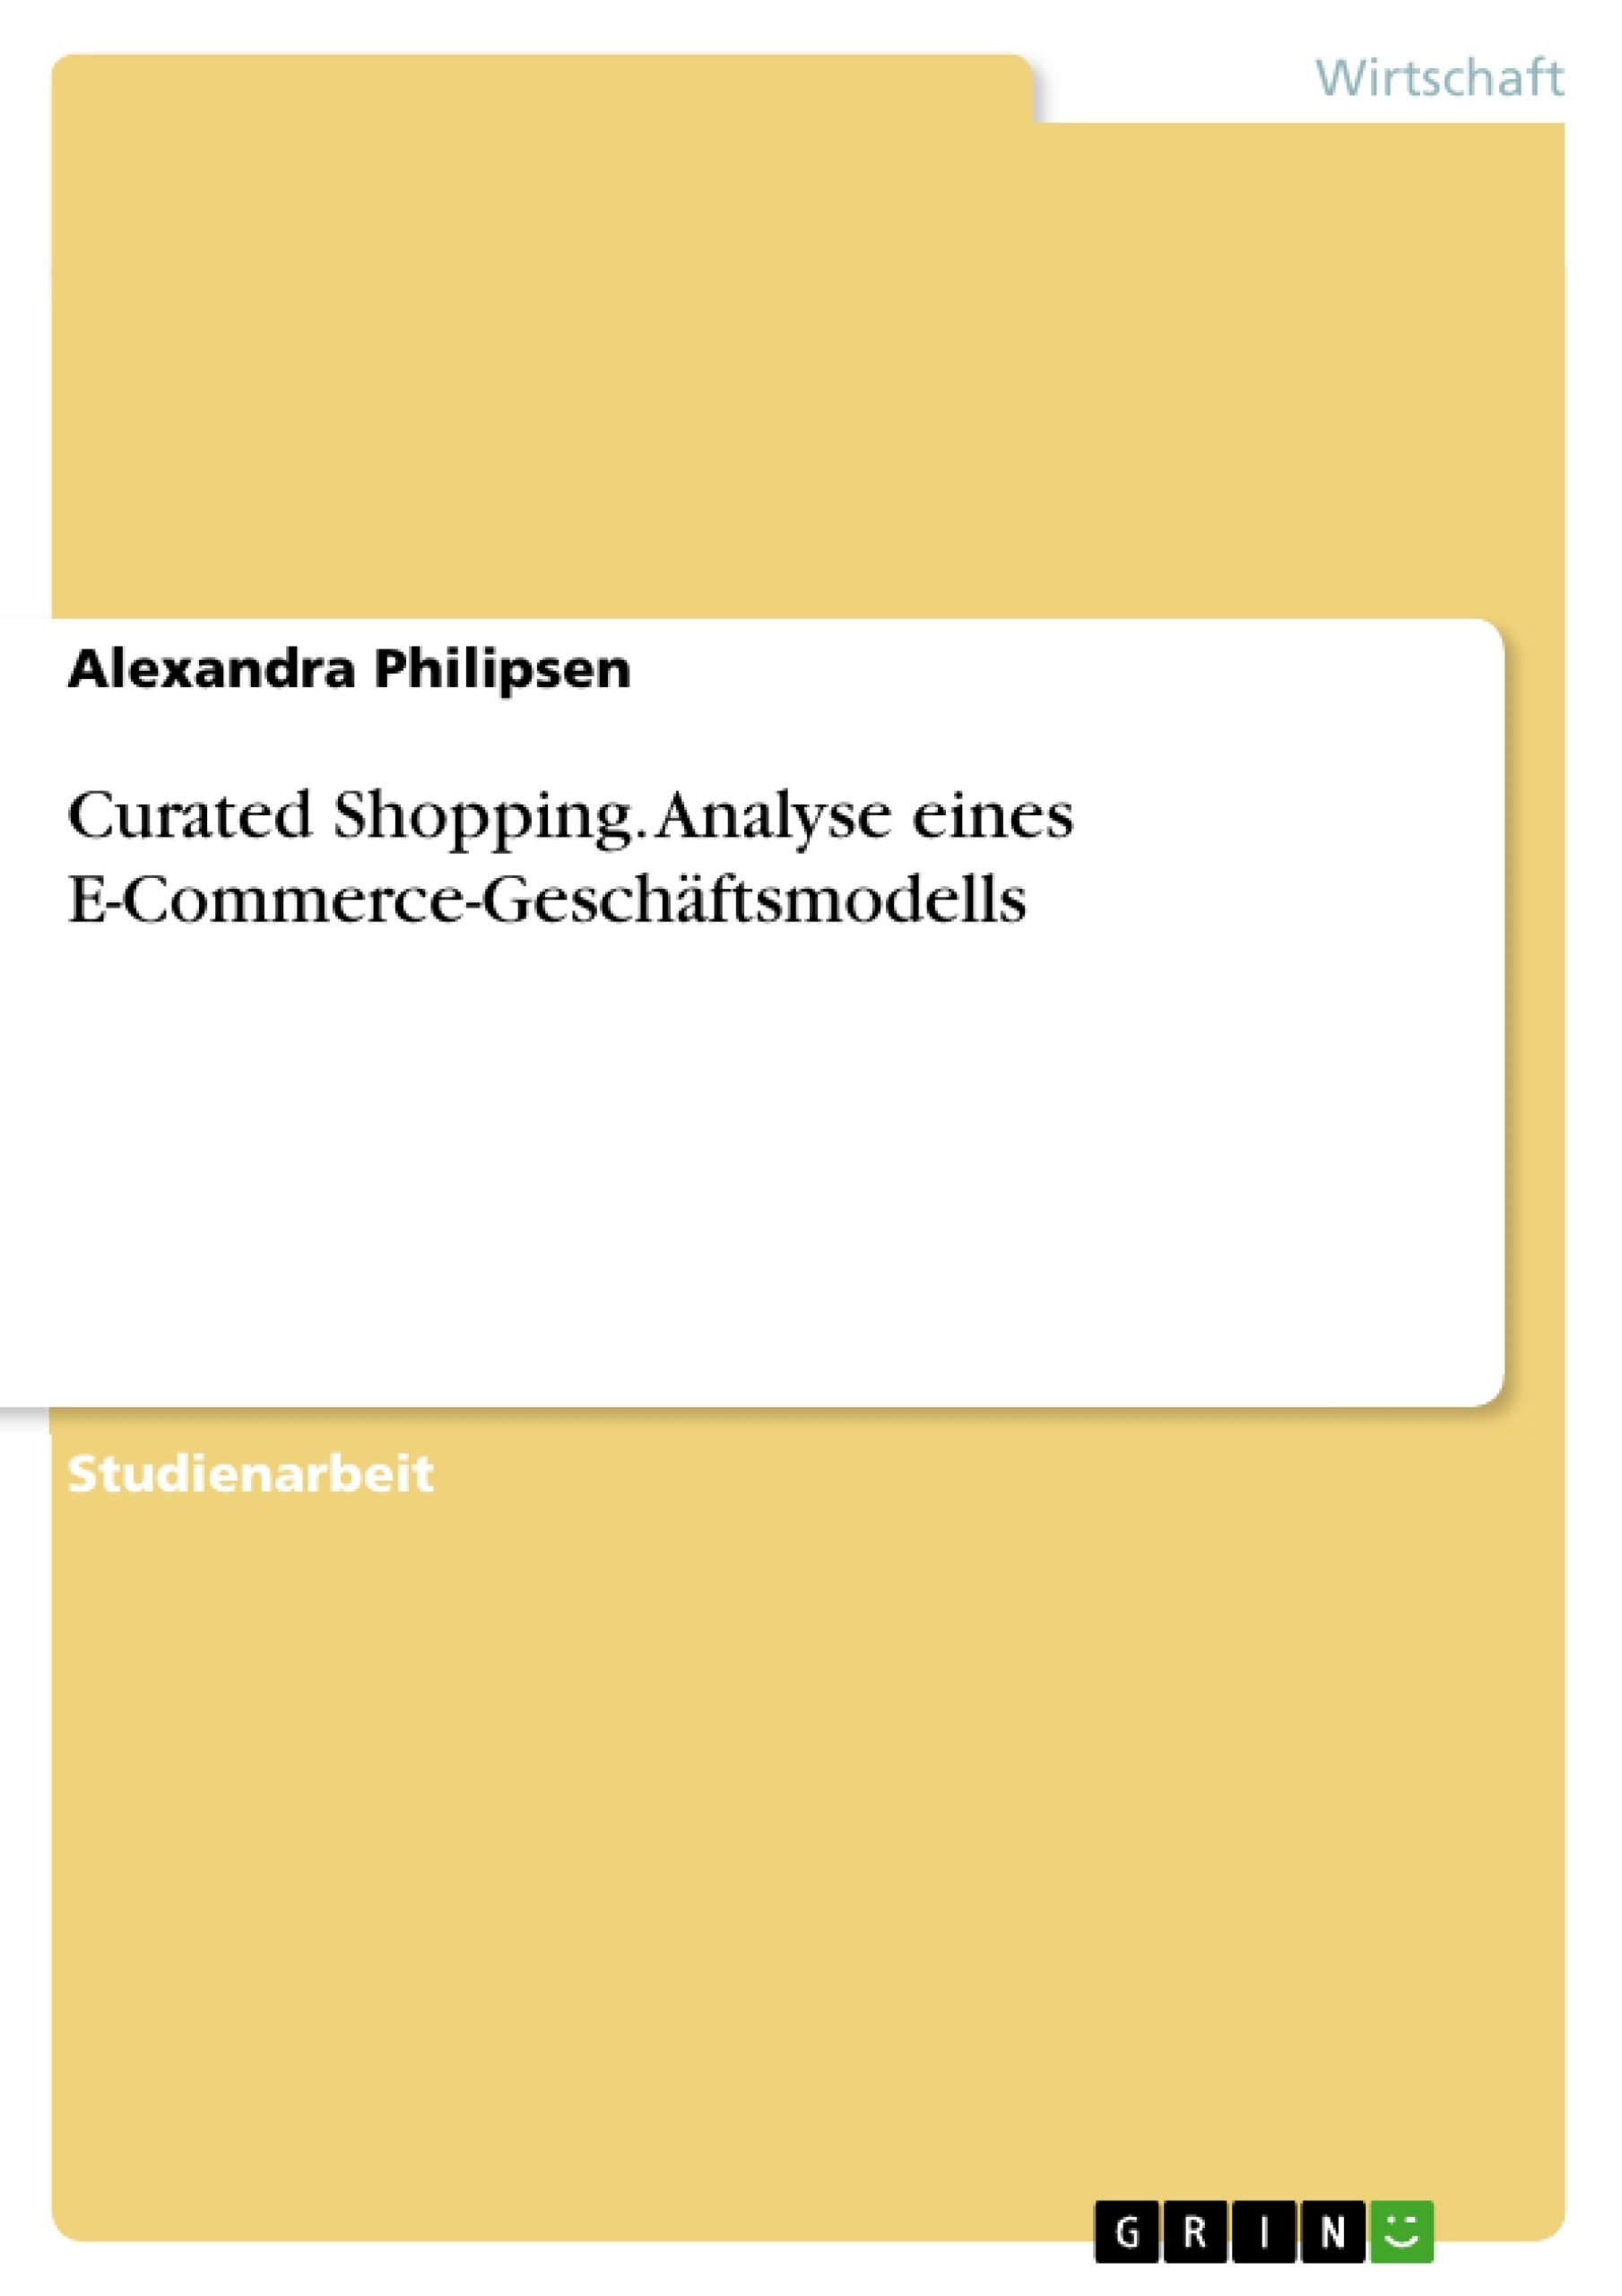 Title: Curated Shopping. Analyse eines E-Commerce-Geschäftsmodells